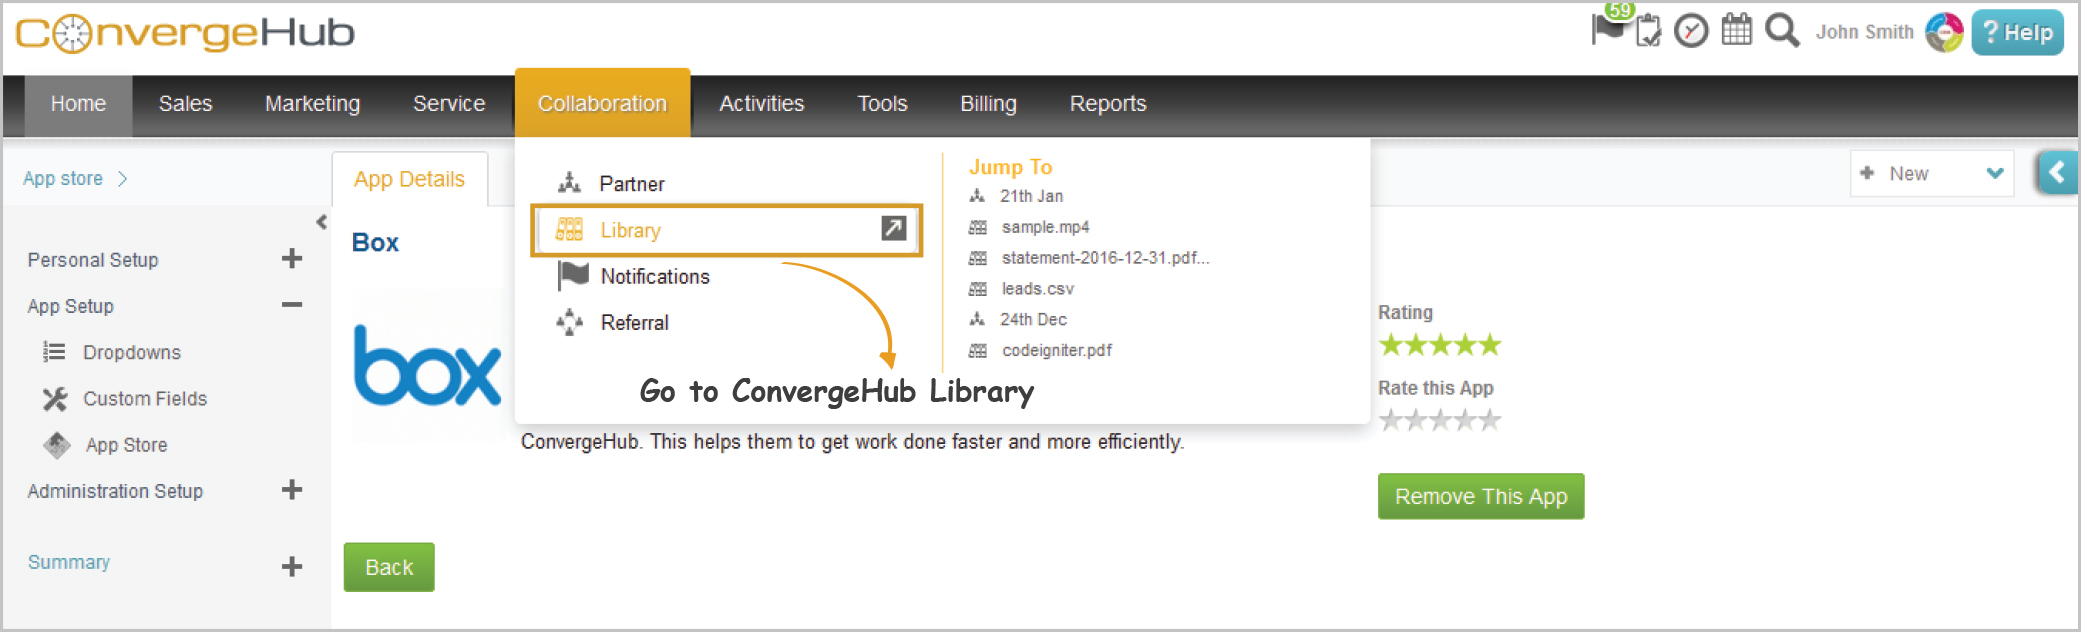 Go to ConvergeHub Library under Collaboration module